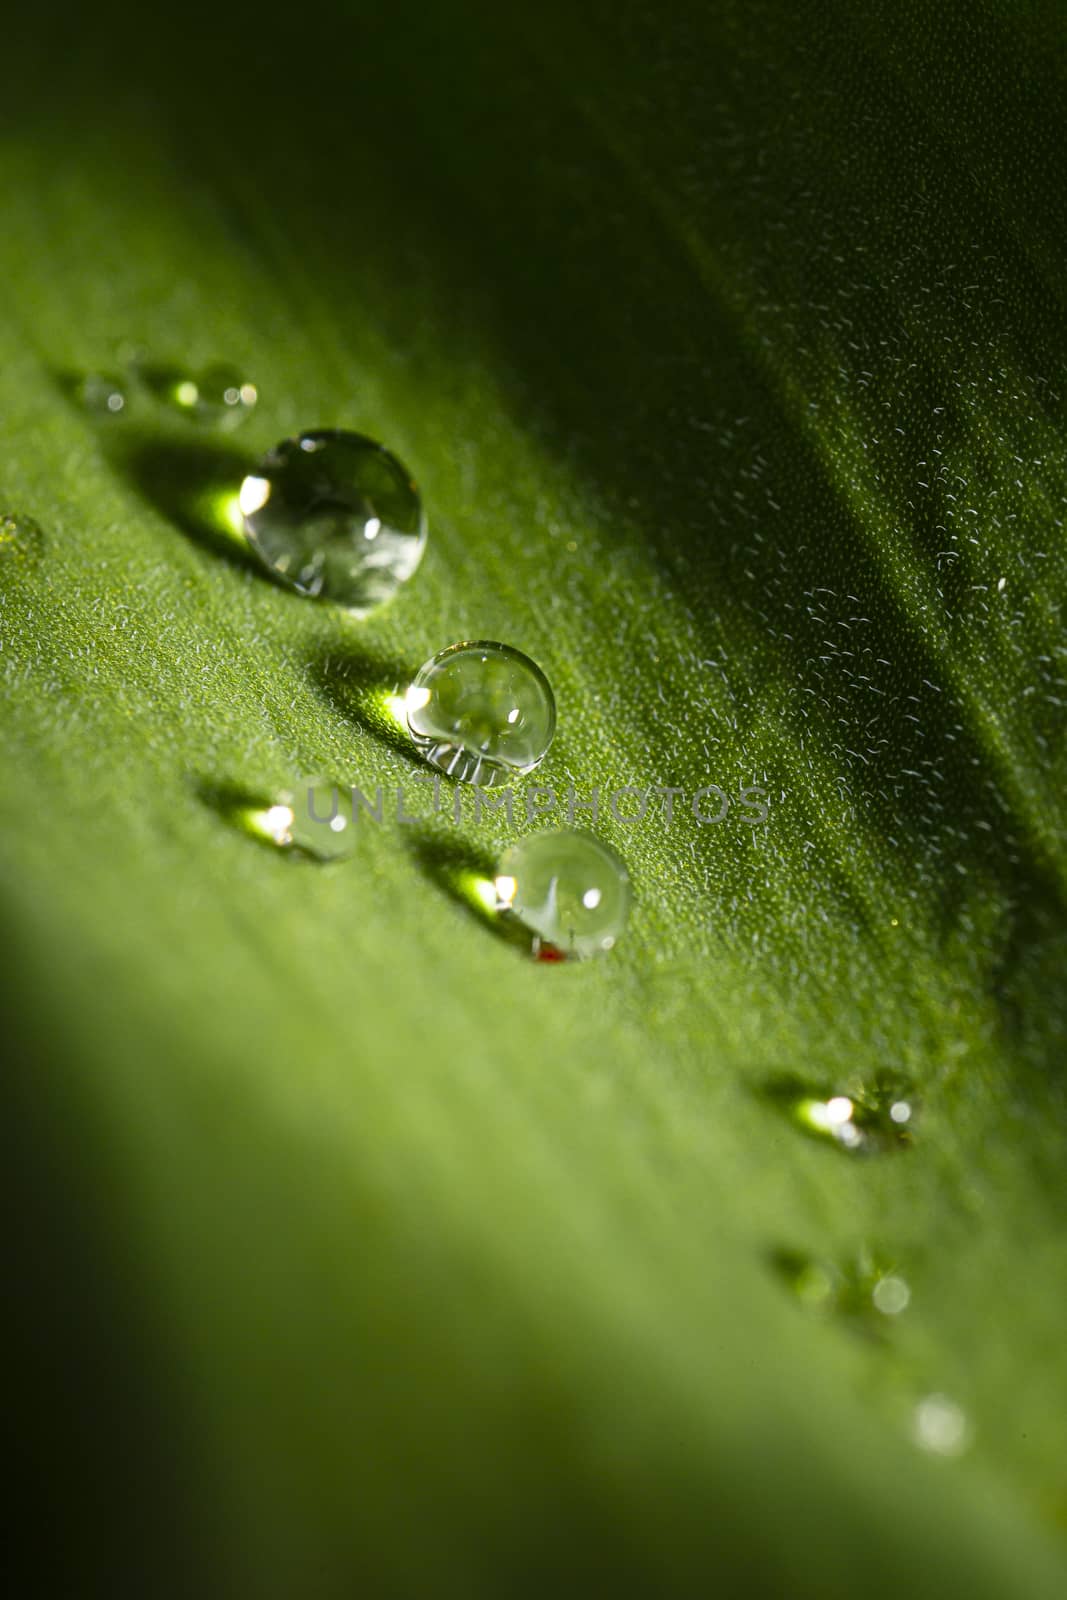 Drop of water on a leaf by mypstudio